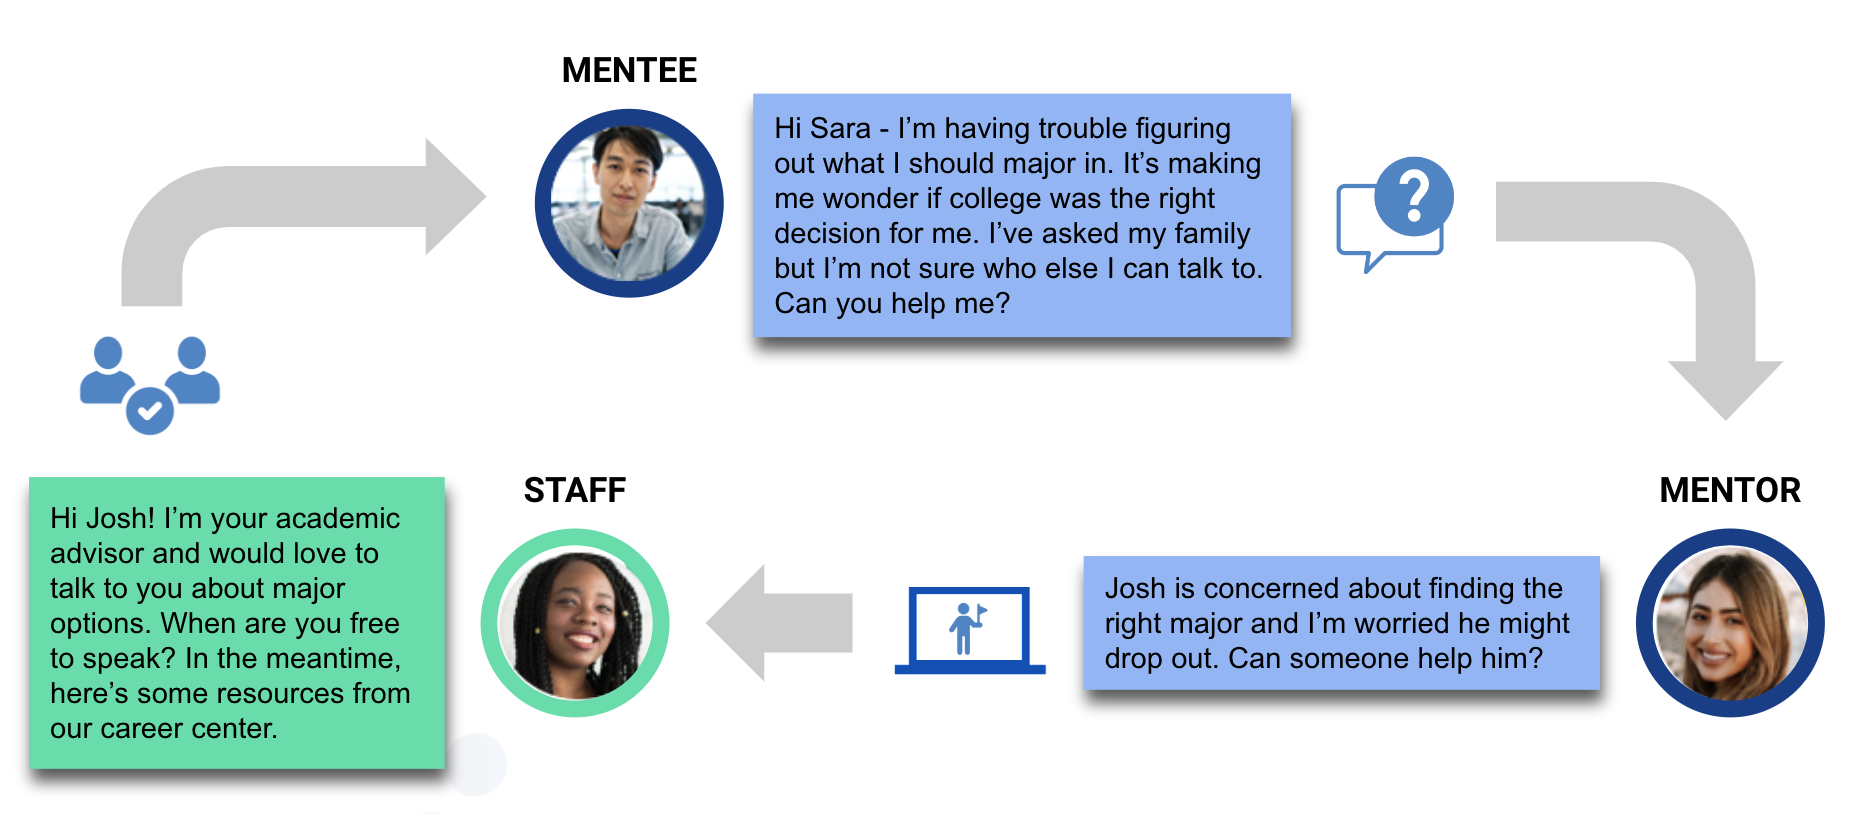 A diagram of the flow of a Flag: mentee speaks about an academic concern, mentor raises a flag with a note asking for support, staff contacts mentee.